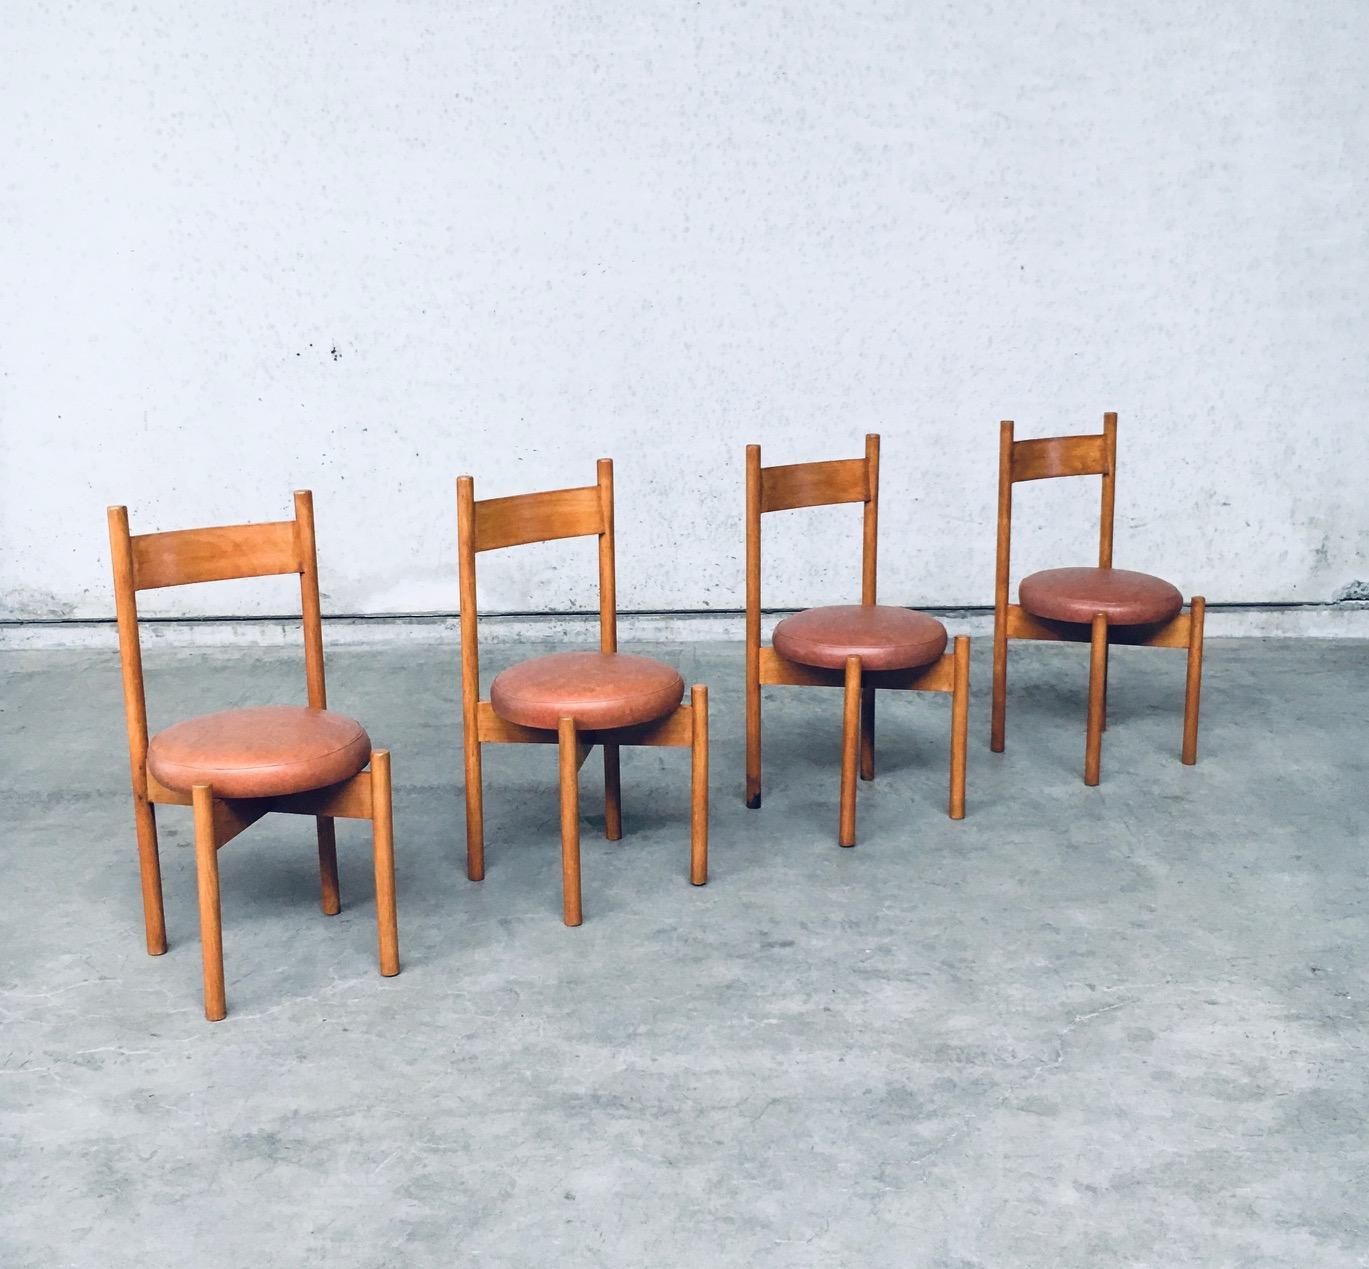 Vintage Midcentury Modern Design Dining Chair set of 4 in the Style of Charlotte Perriand 'Meribel' Model chairs. Made in France, 1960's period. Beech constructed chairs with a faux leather cushion for seat. The chairs have round legs with an X